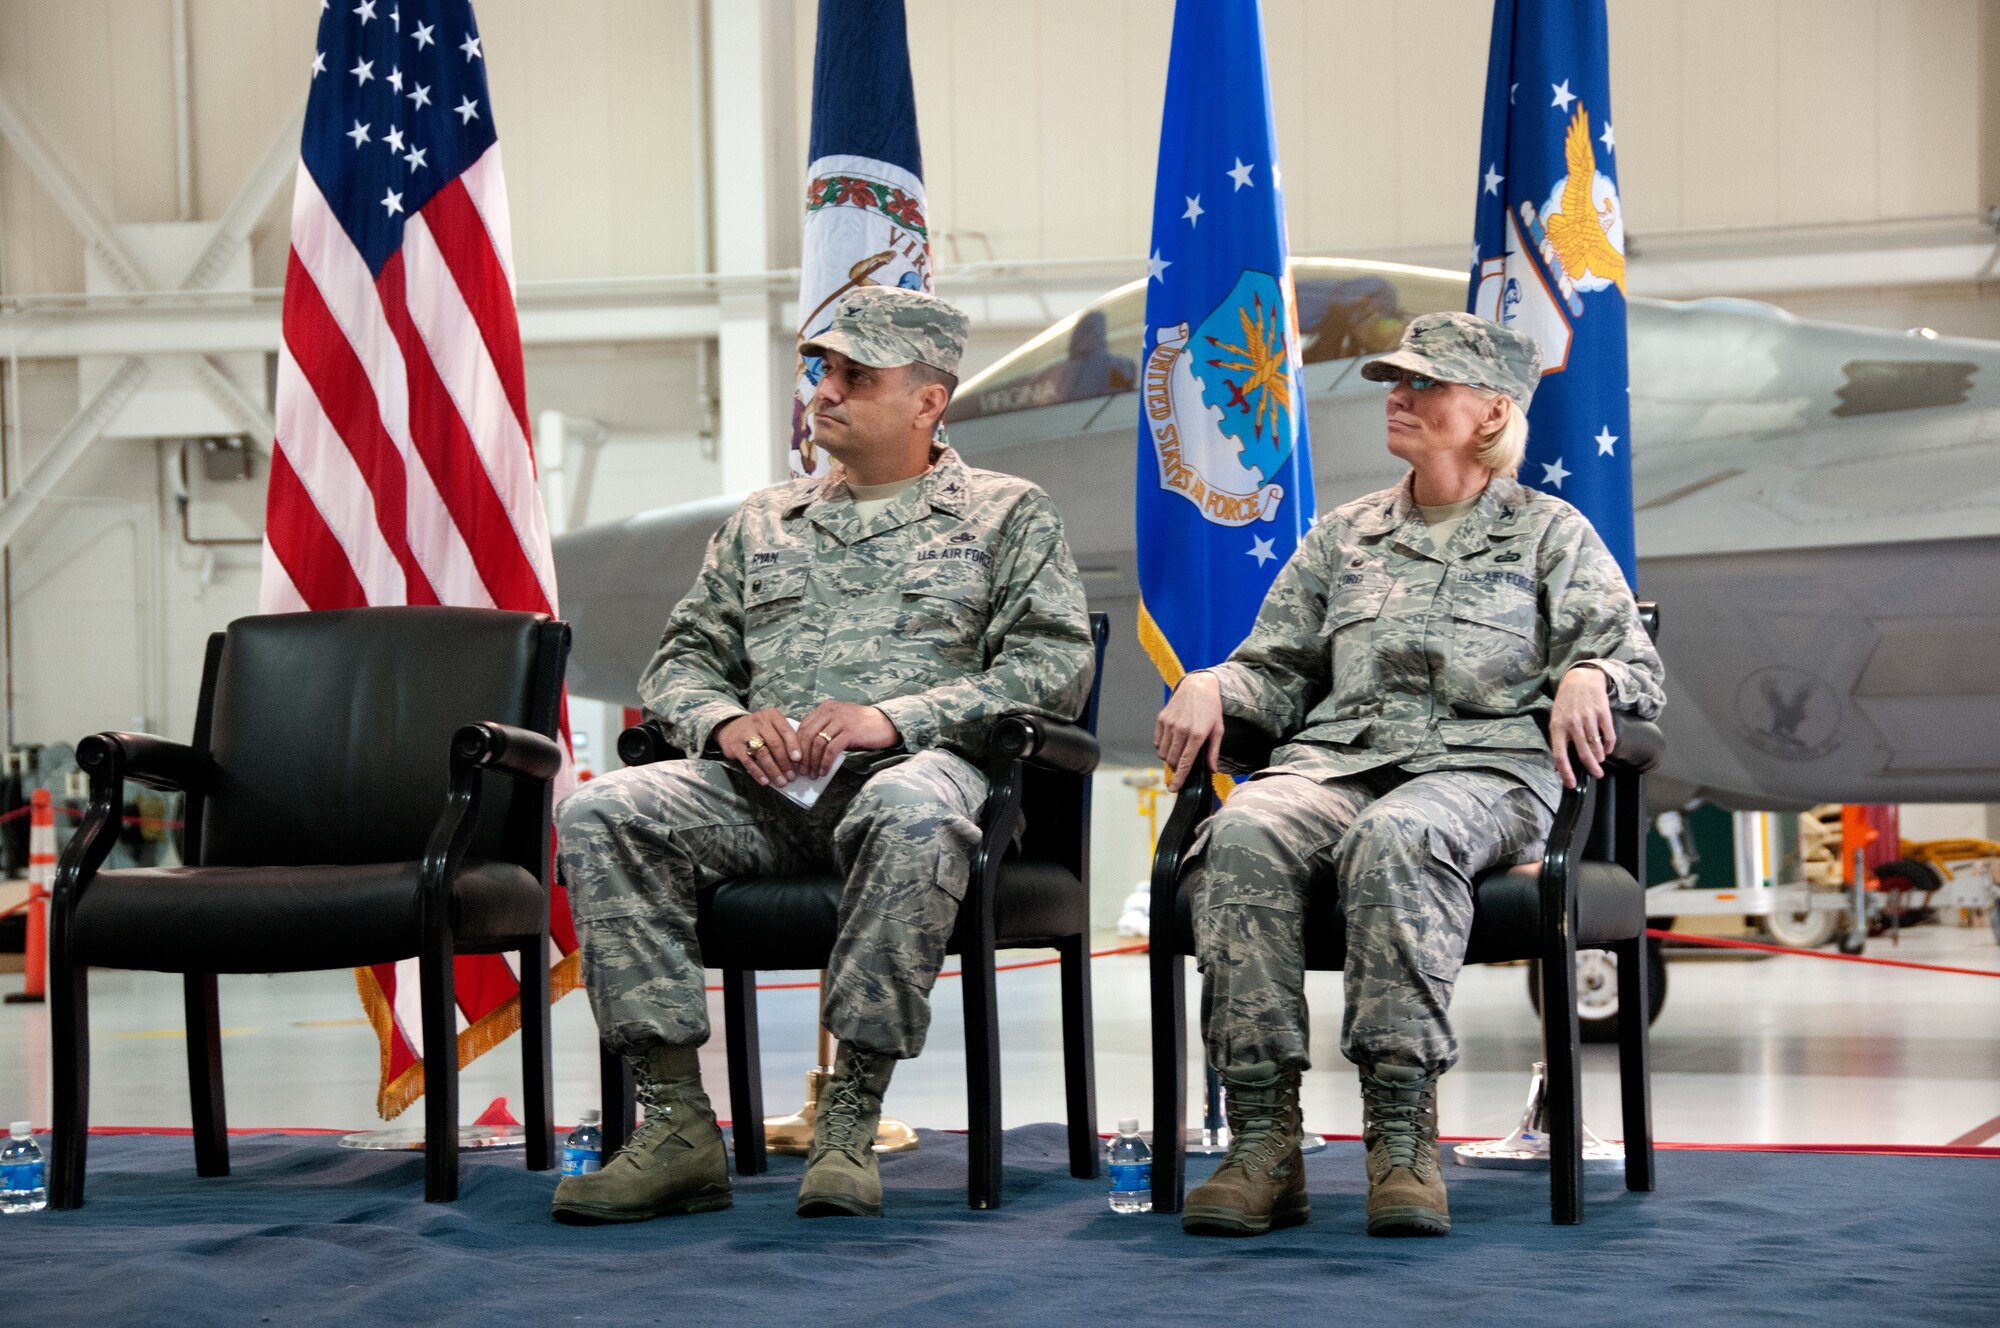 The 192nd Mission Support Group celebrated a change of command ceremony October 18, 2015, at Joint Base Langley-Eustis, Virginia. Col. Toni M. Lord assumed command of the Mission Support Group from Col. Jeffery L. Ryan. The 192nd MSG is comprised of four Squadrons with more than 340 personnel supporting an array of missions including security, personnel, communications, civil engineering, supply chain management, and logistics readiness. (U.S. Air National Guard photo by Master Sgt. Carlos J. Claudio)
